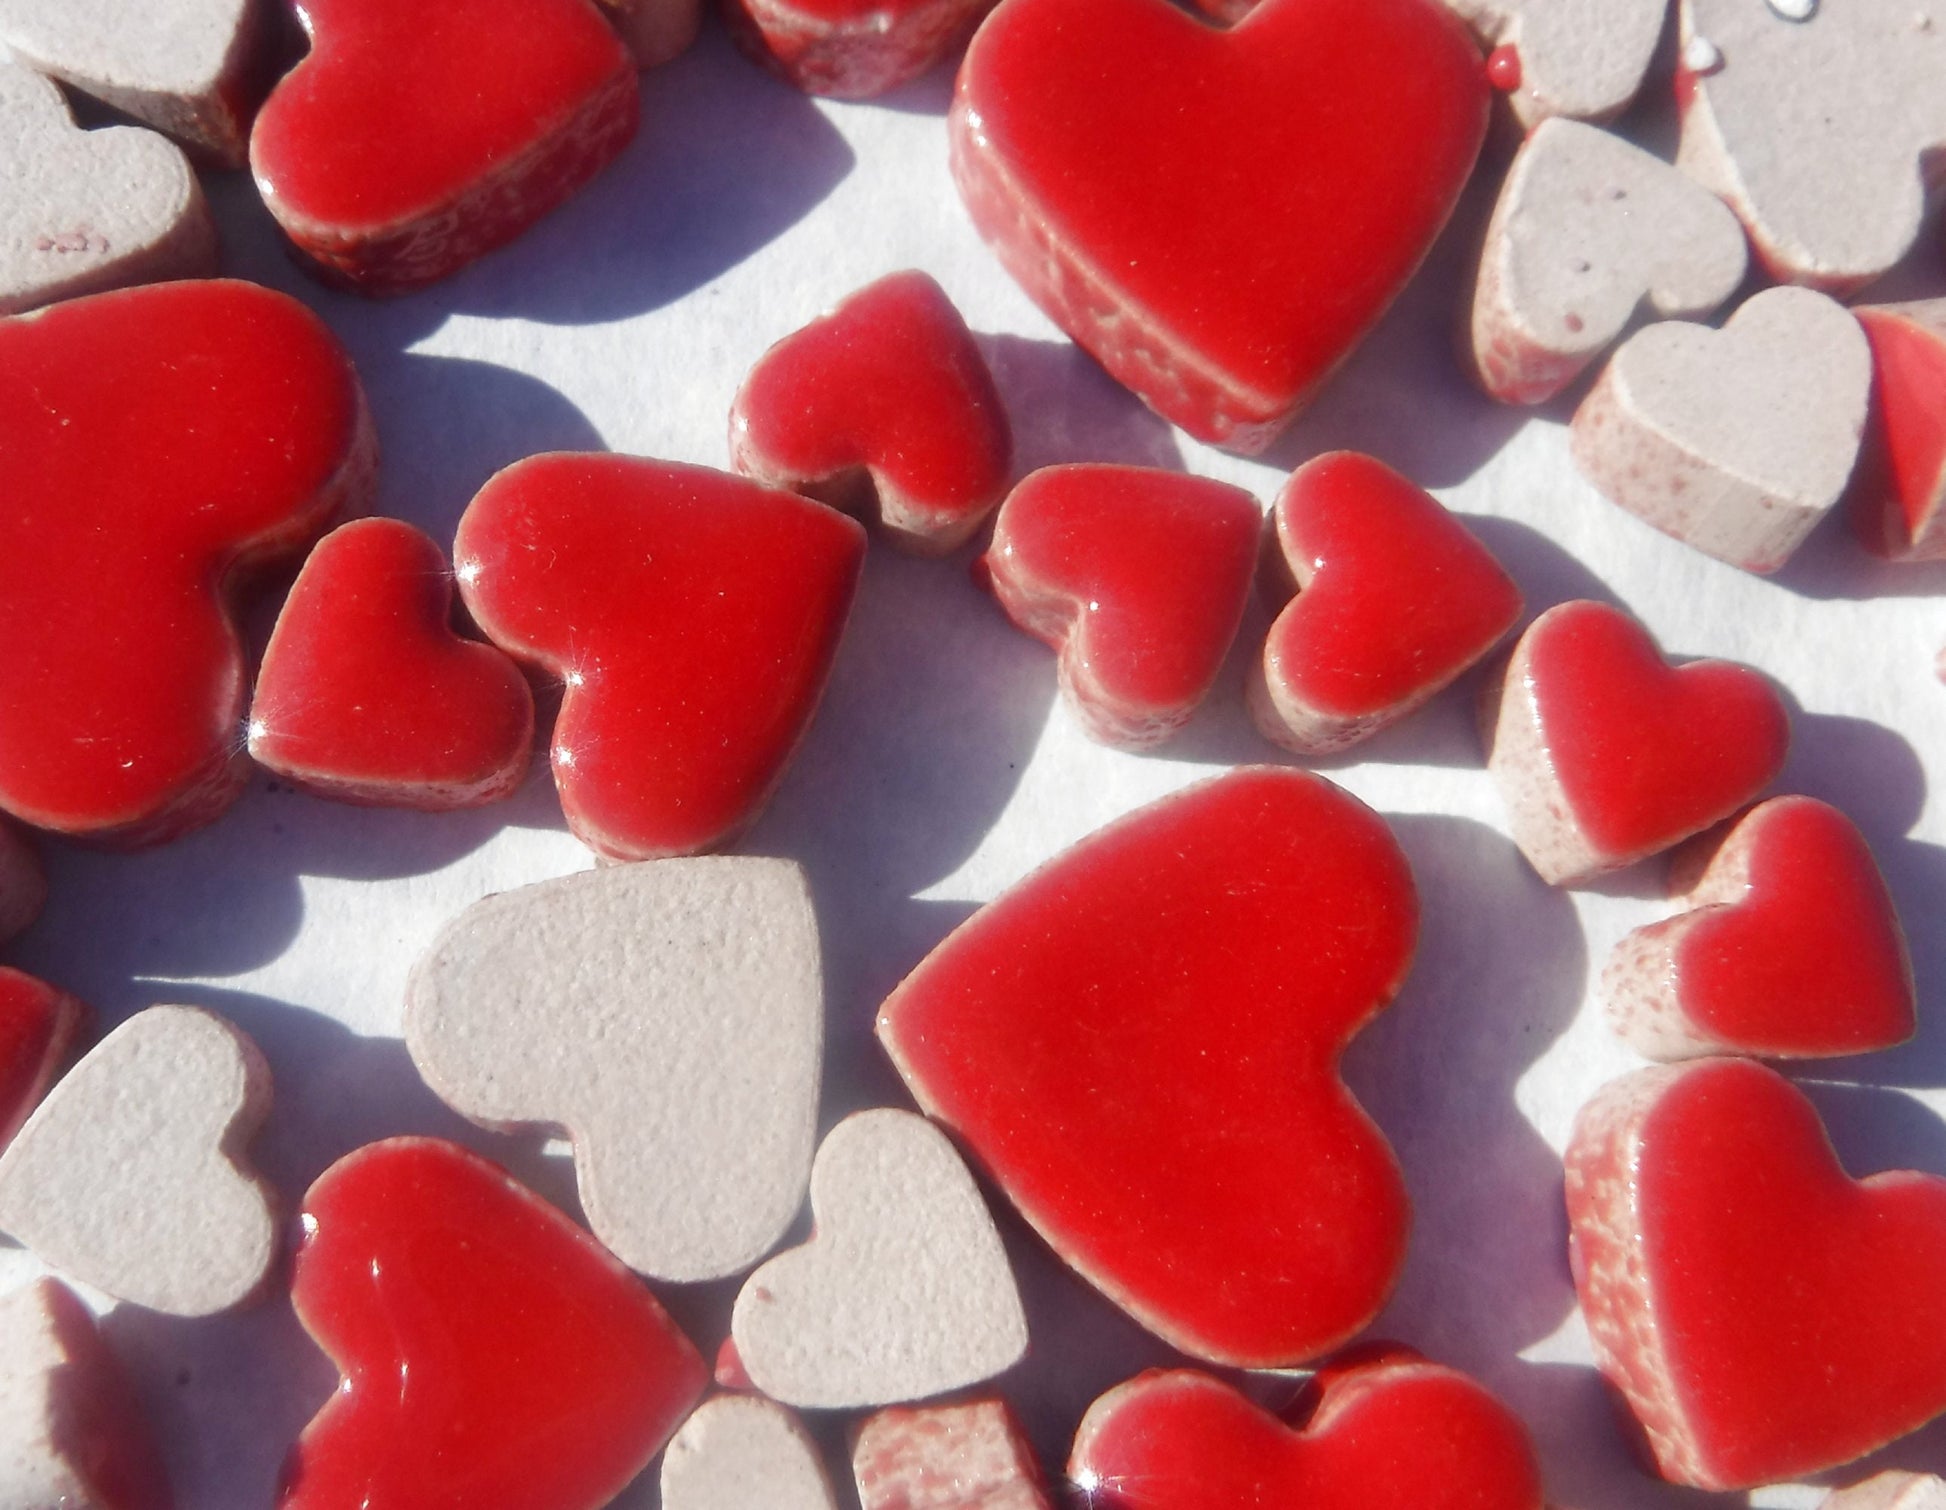 Red Hearts Mosaic Tiles - 50g Ceramic in Mix of 3 Sizes - 20mm, 15mm, 10mm - Poppy Red